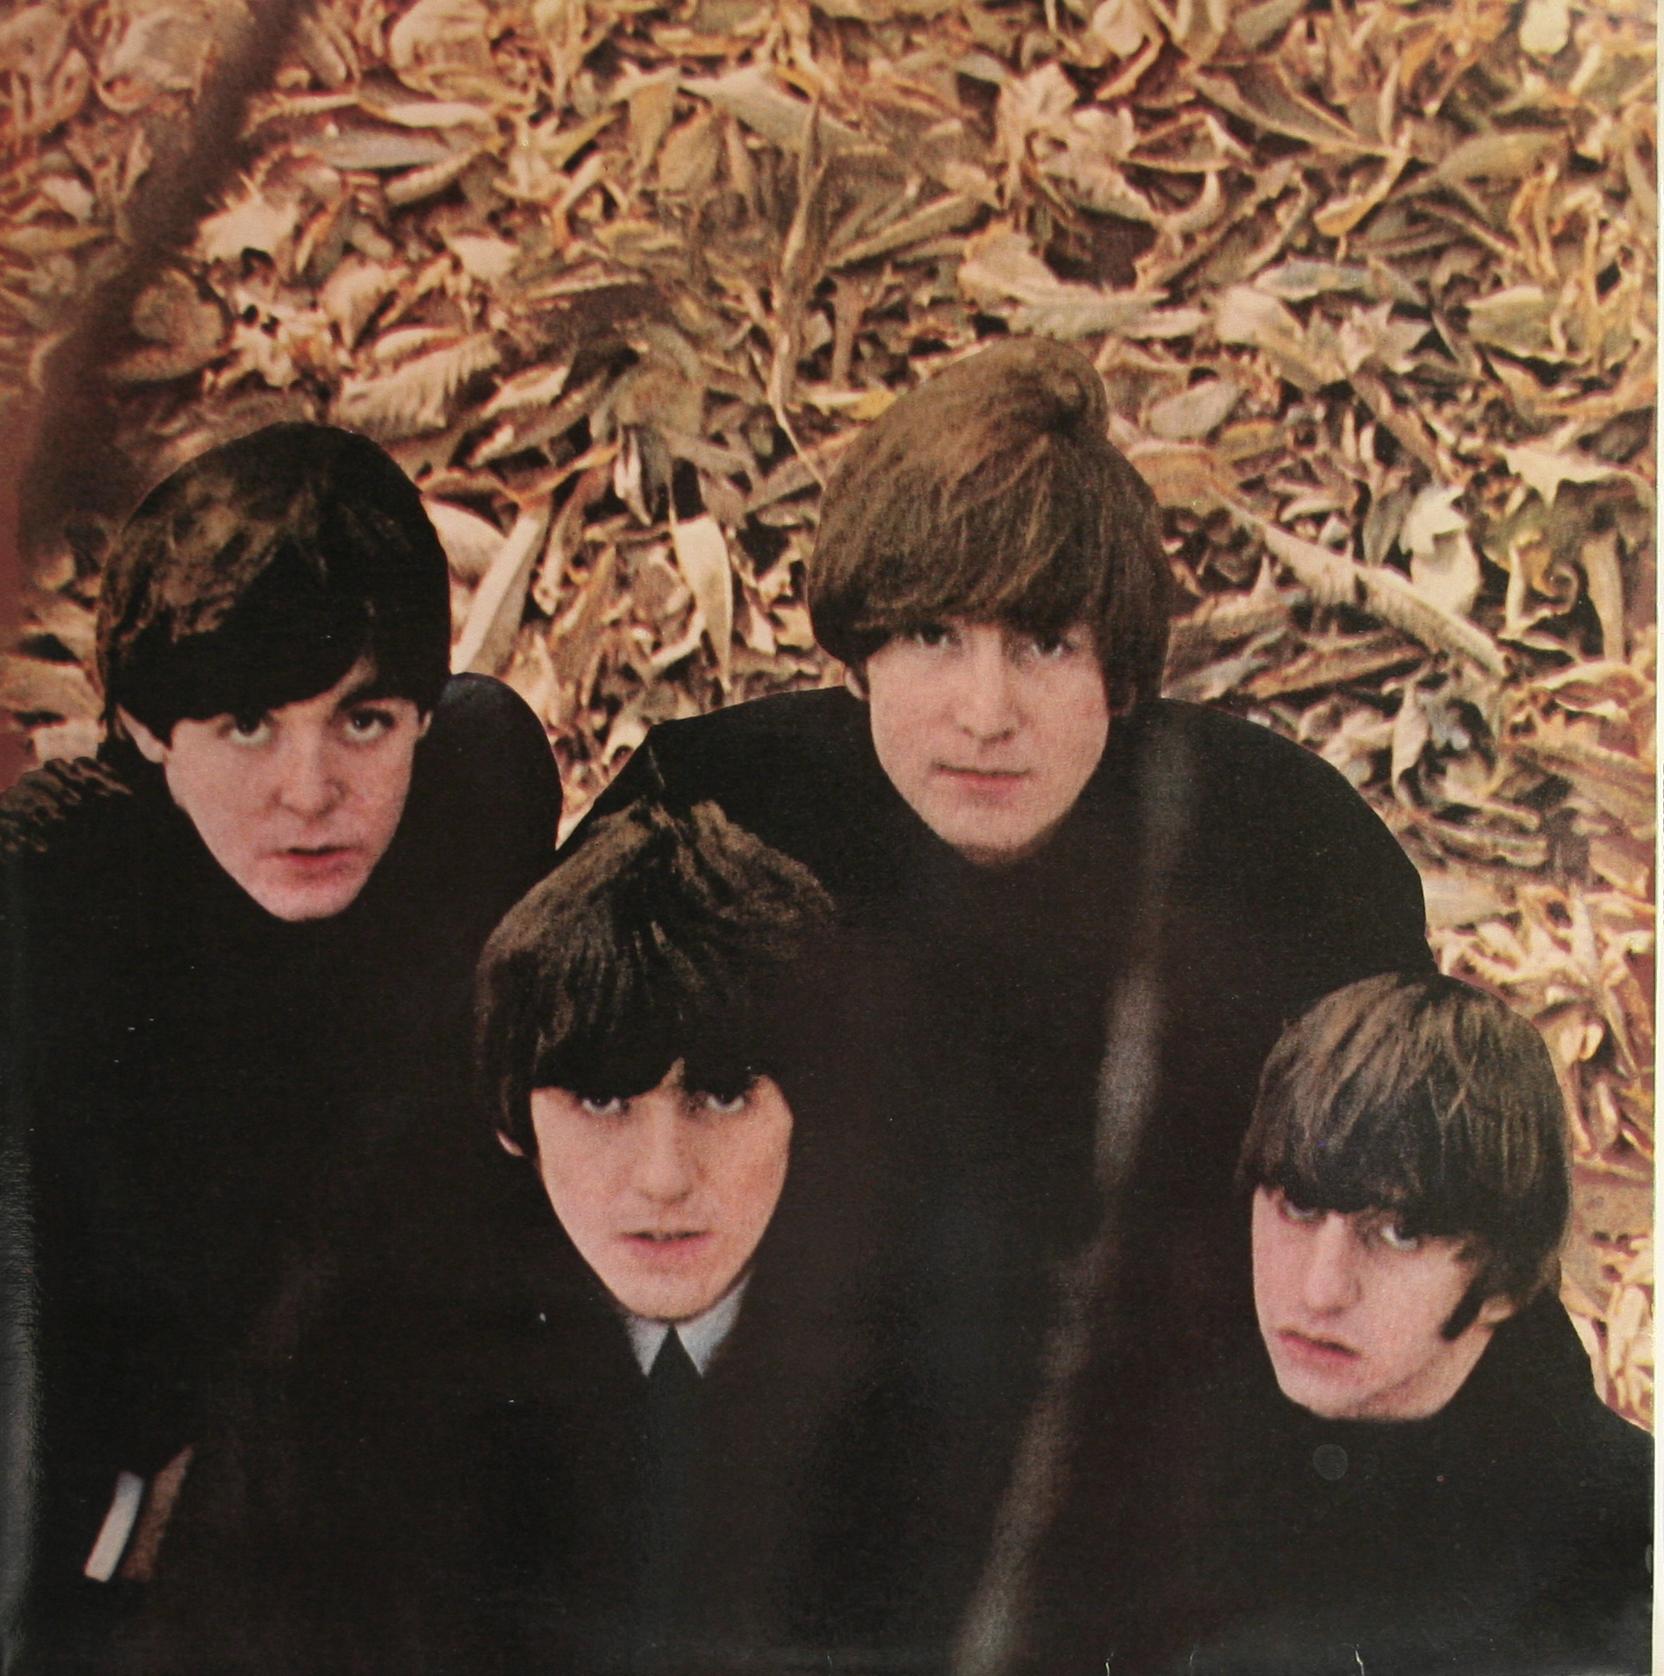 The Beatles Collection » Beatles For Sale, Parlophone, PMC 1240.